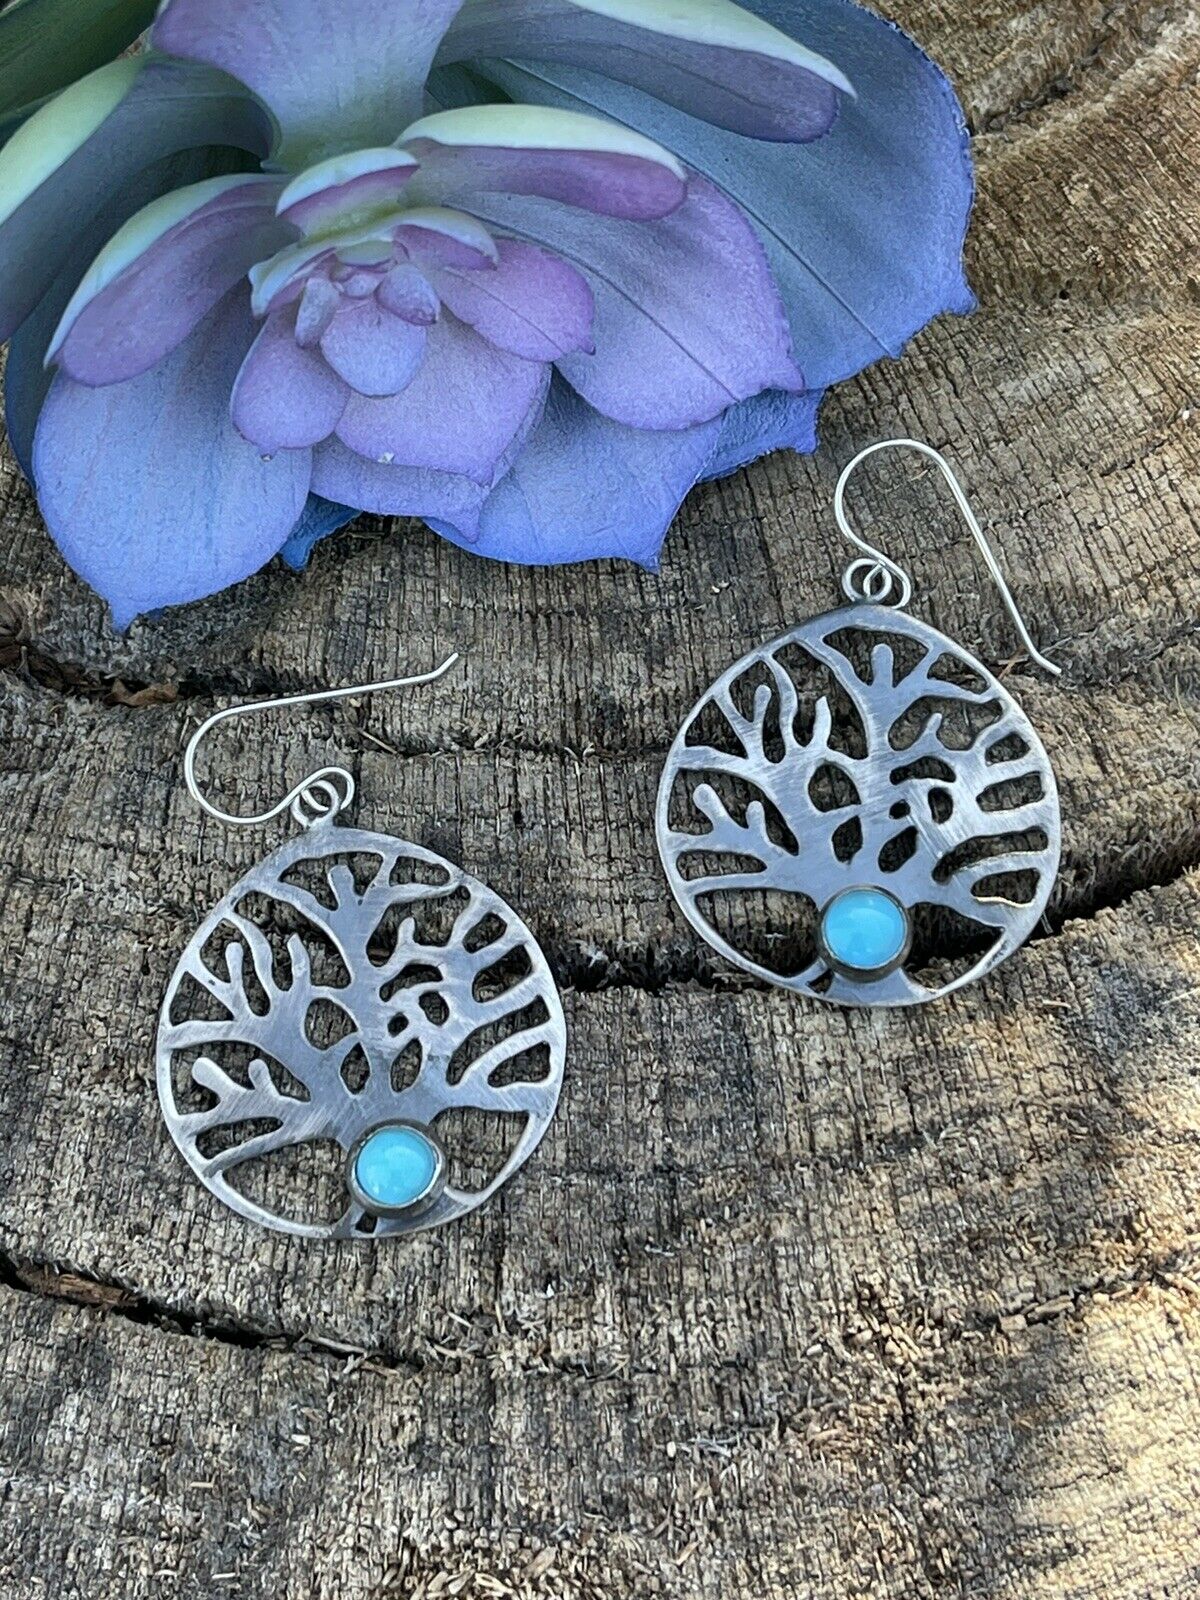 Navajo Sterling Silver Turquoise Tree Of Life Dangle Earrings